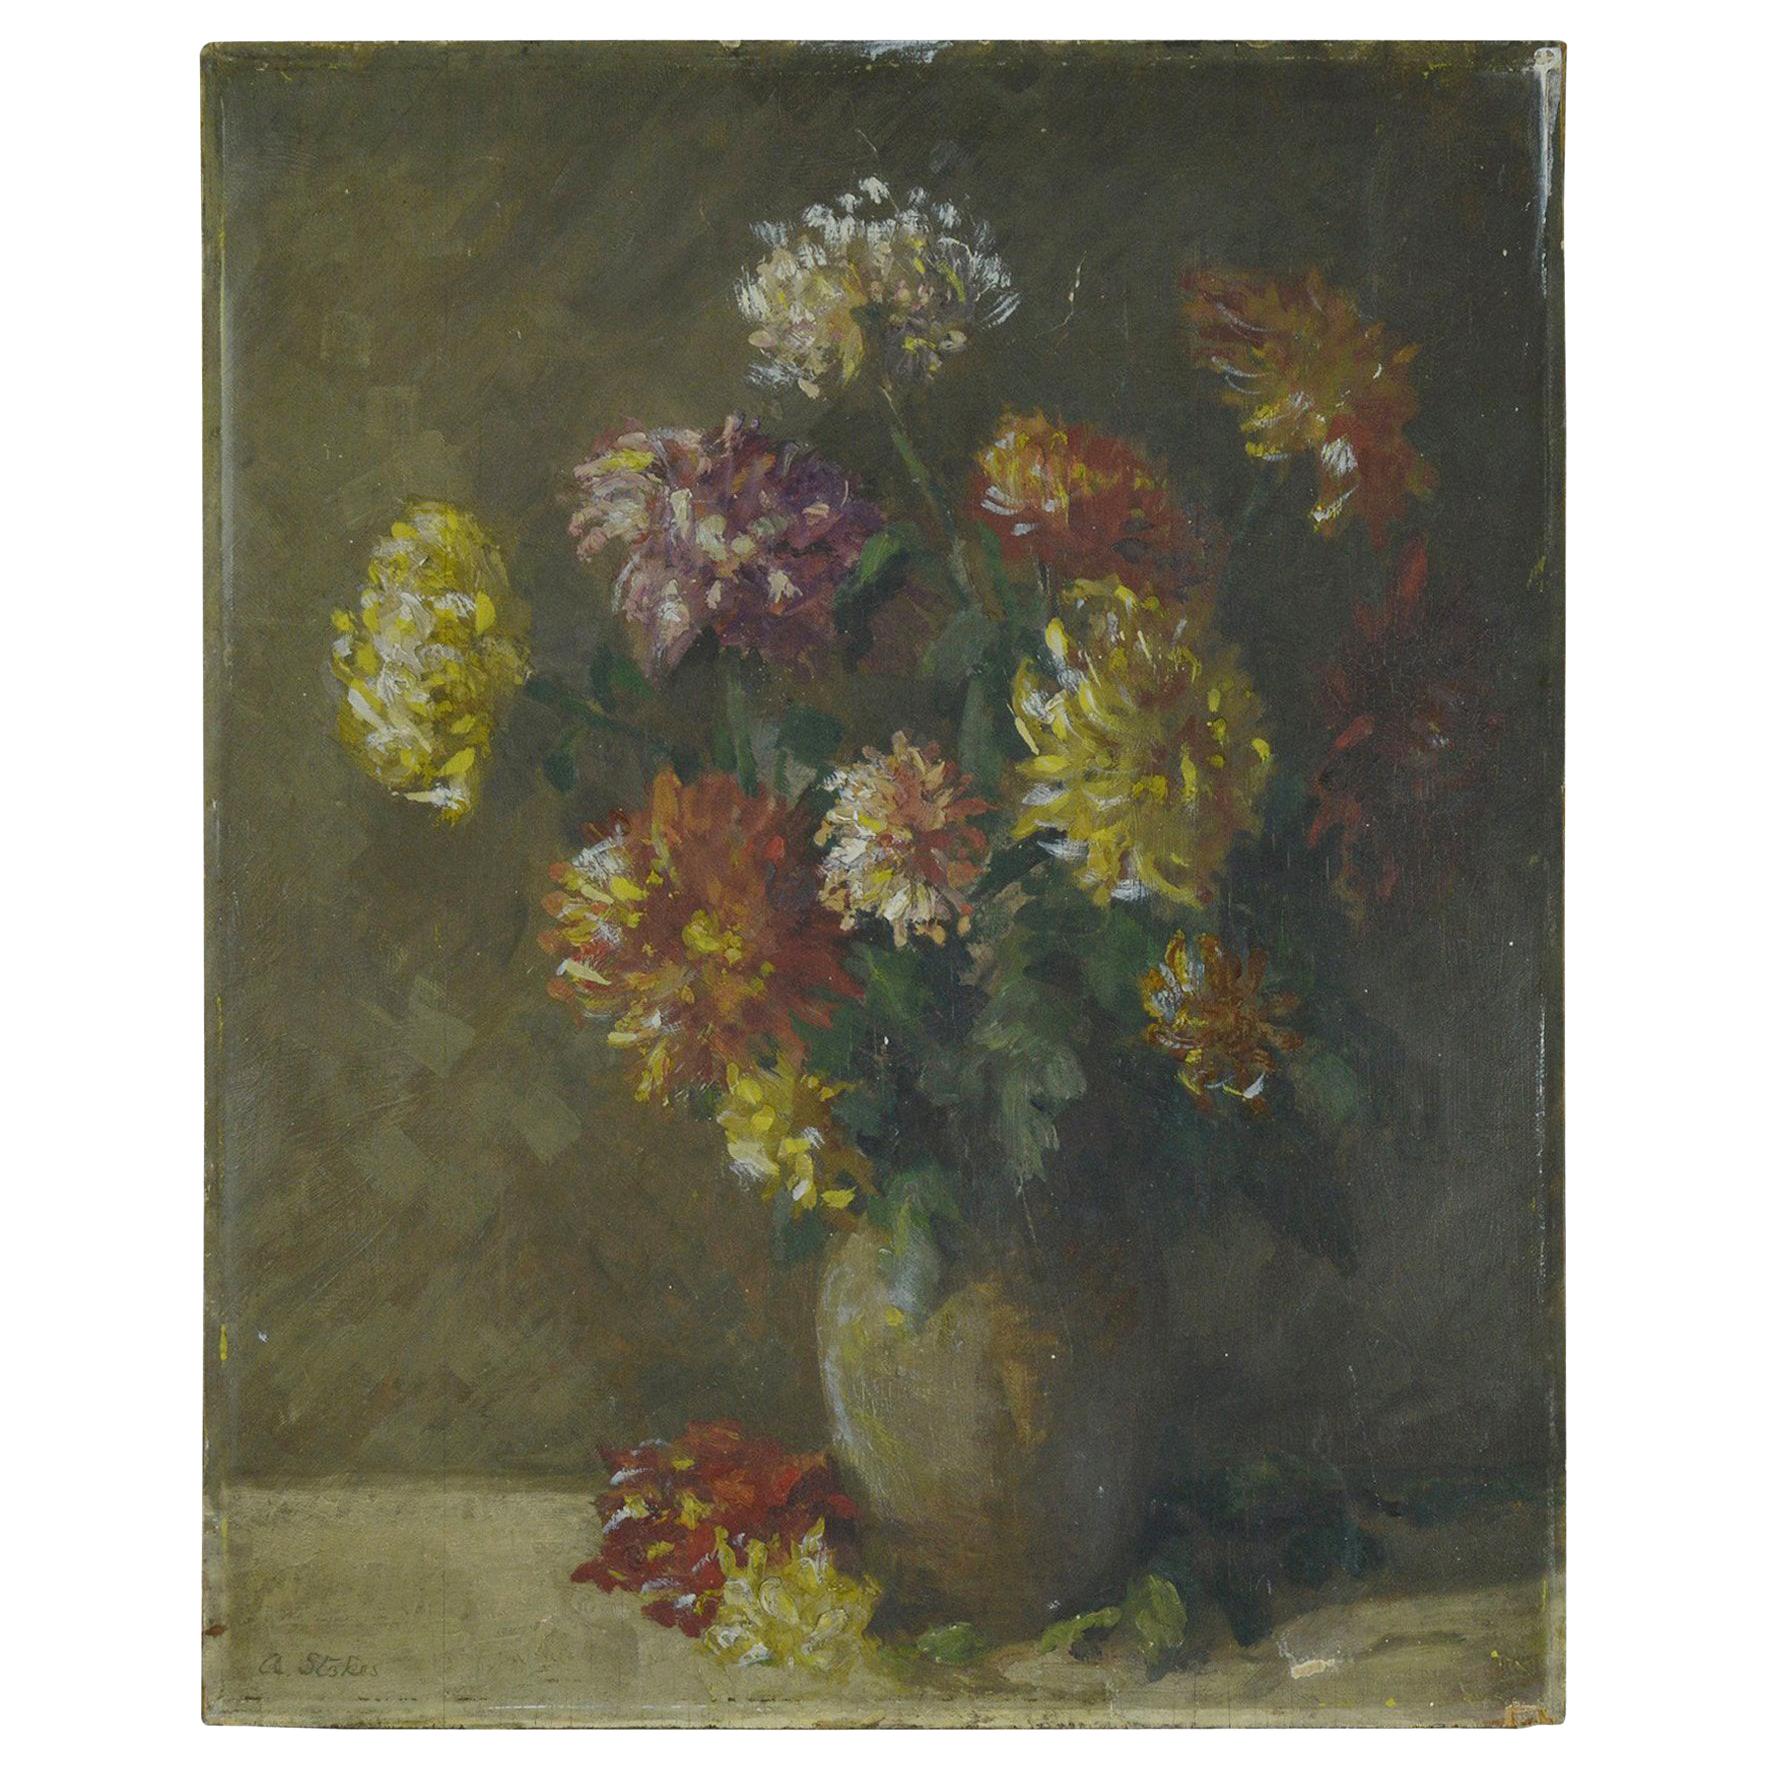 Wonderful painting of chrysanthemums in delightful muted colors.

Oil on board. Unframed. Signed lower left.

Painted in high relief particularly the flowers.

It has been taken out of a frame so the edge is slightly distressed.

Tiny